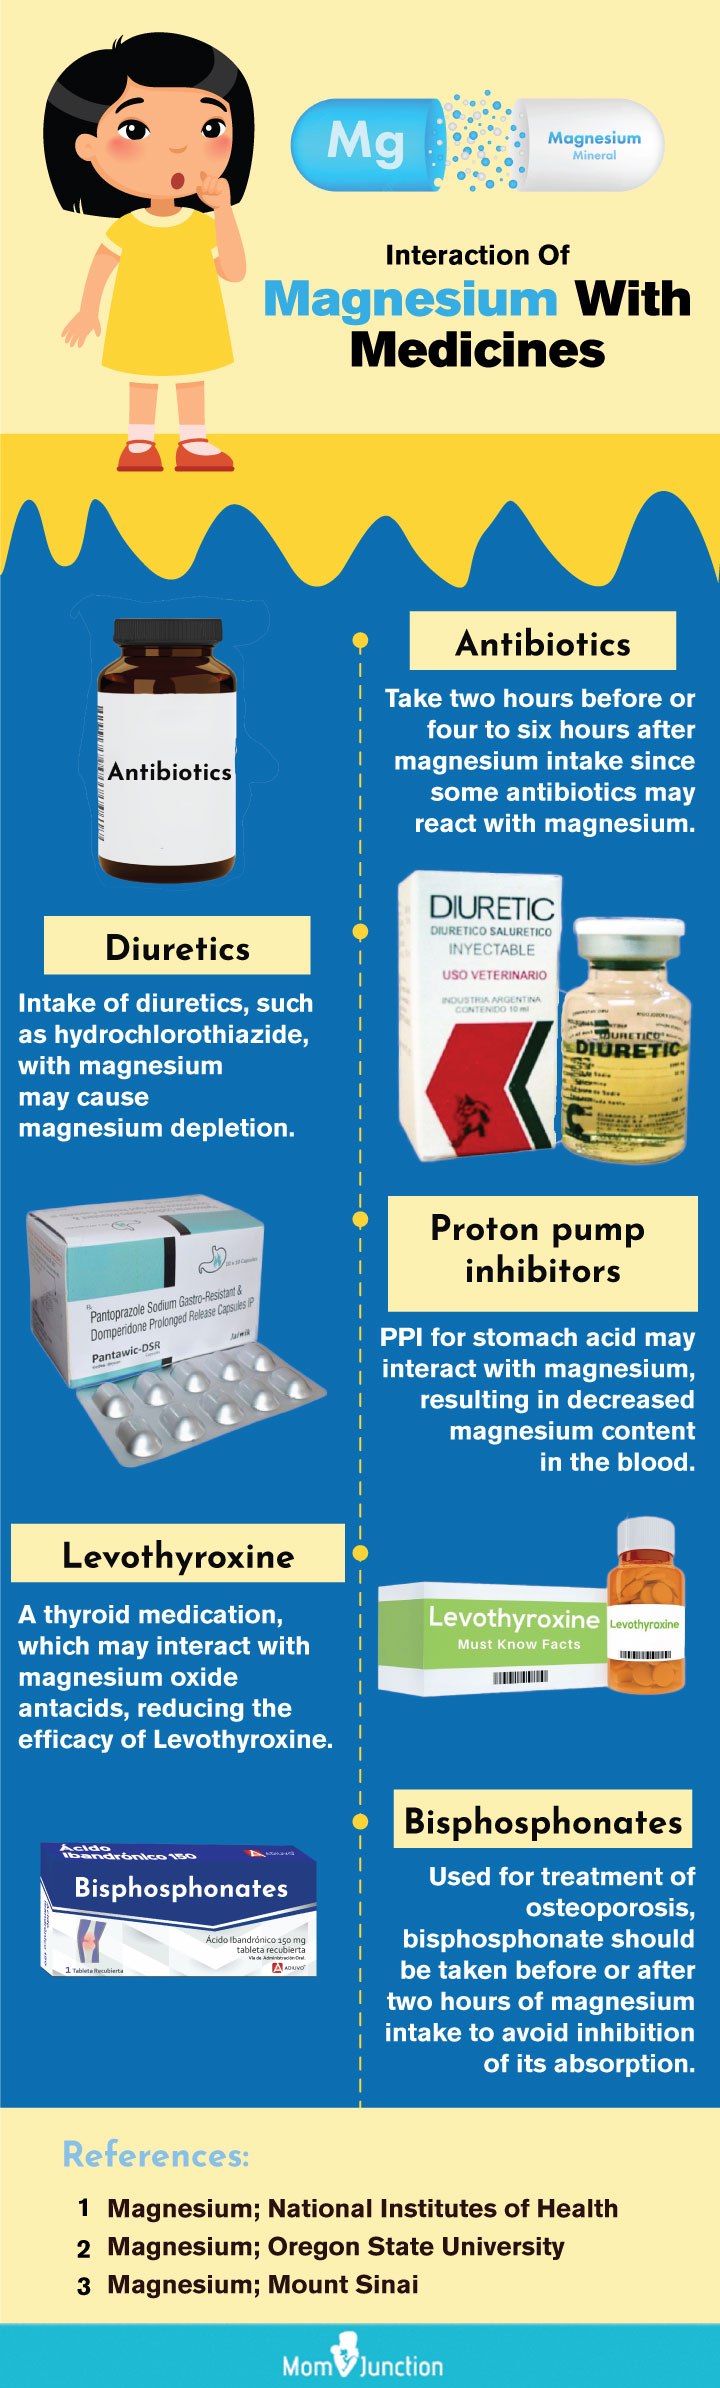 interaction of magnesium with medicines (infographic)